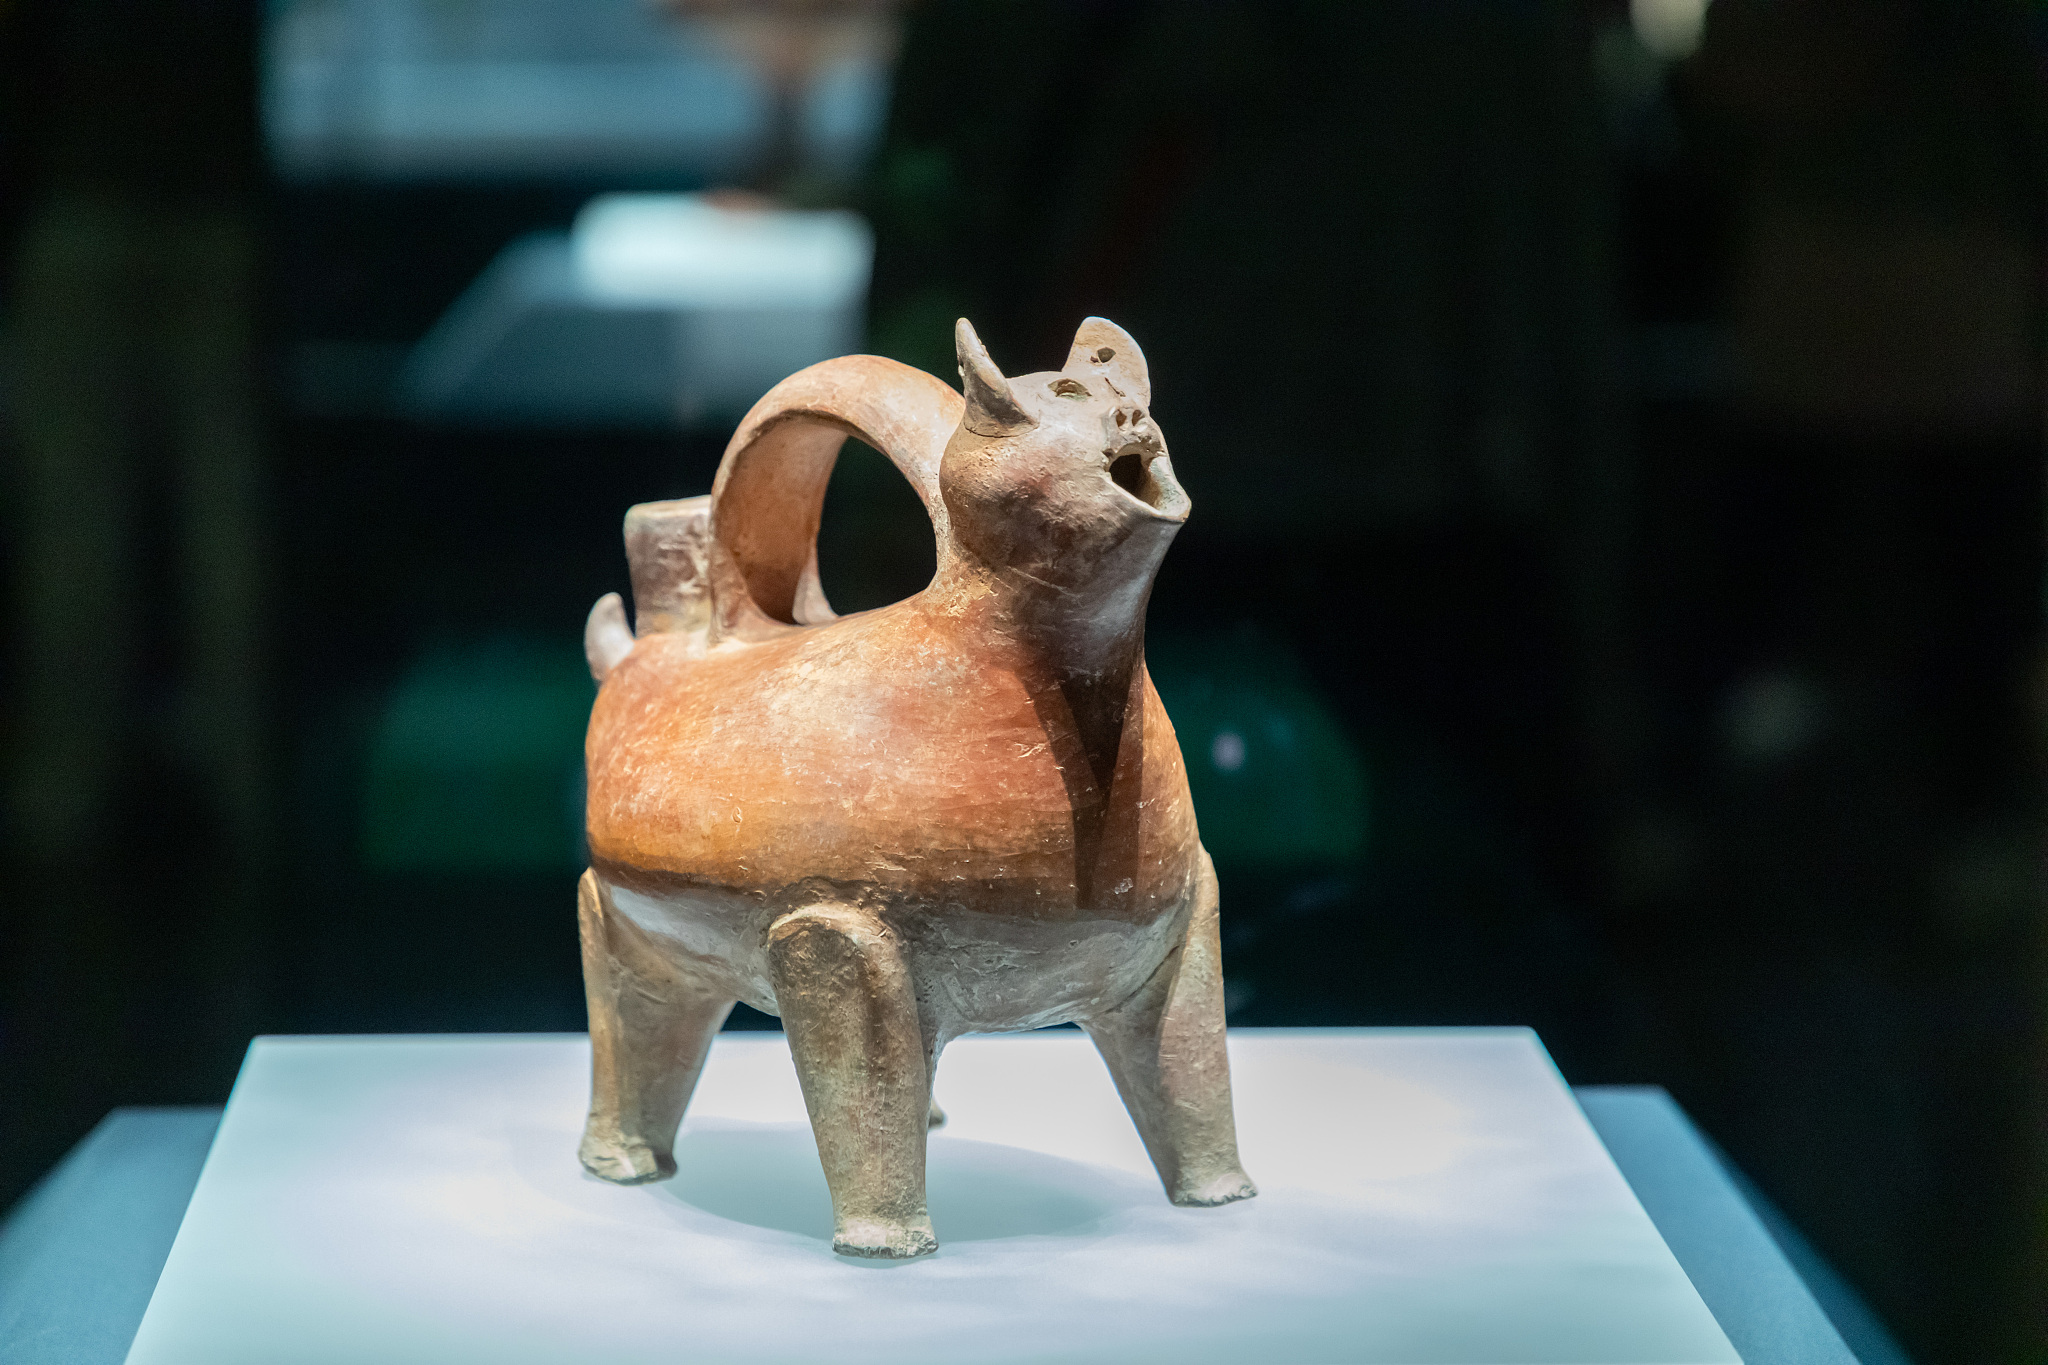 This red ceramic animal-shaped vessel from the Dawenkou Culture dates from between 4,500 and 6,500 years ago. /CFP